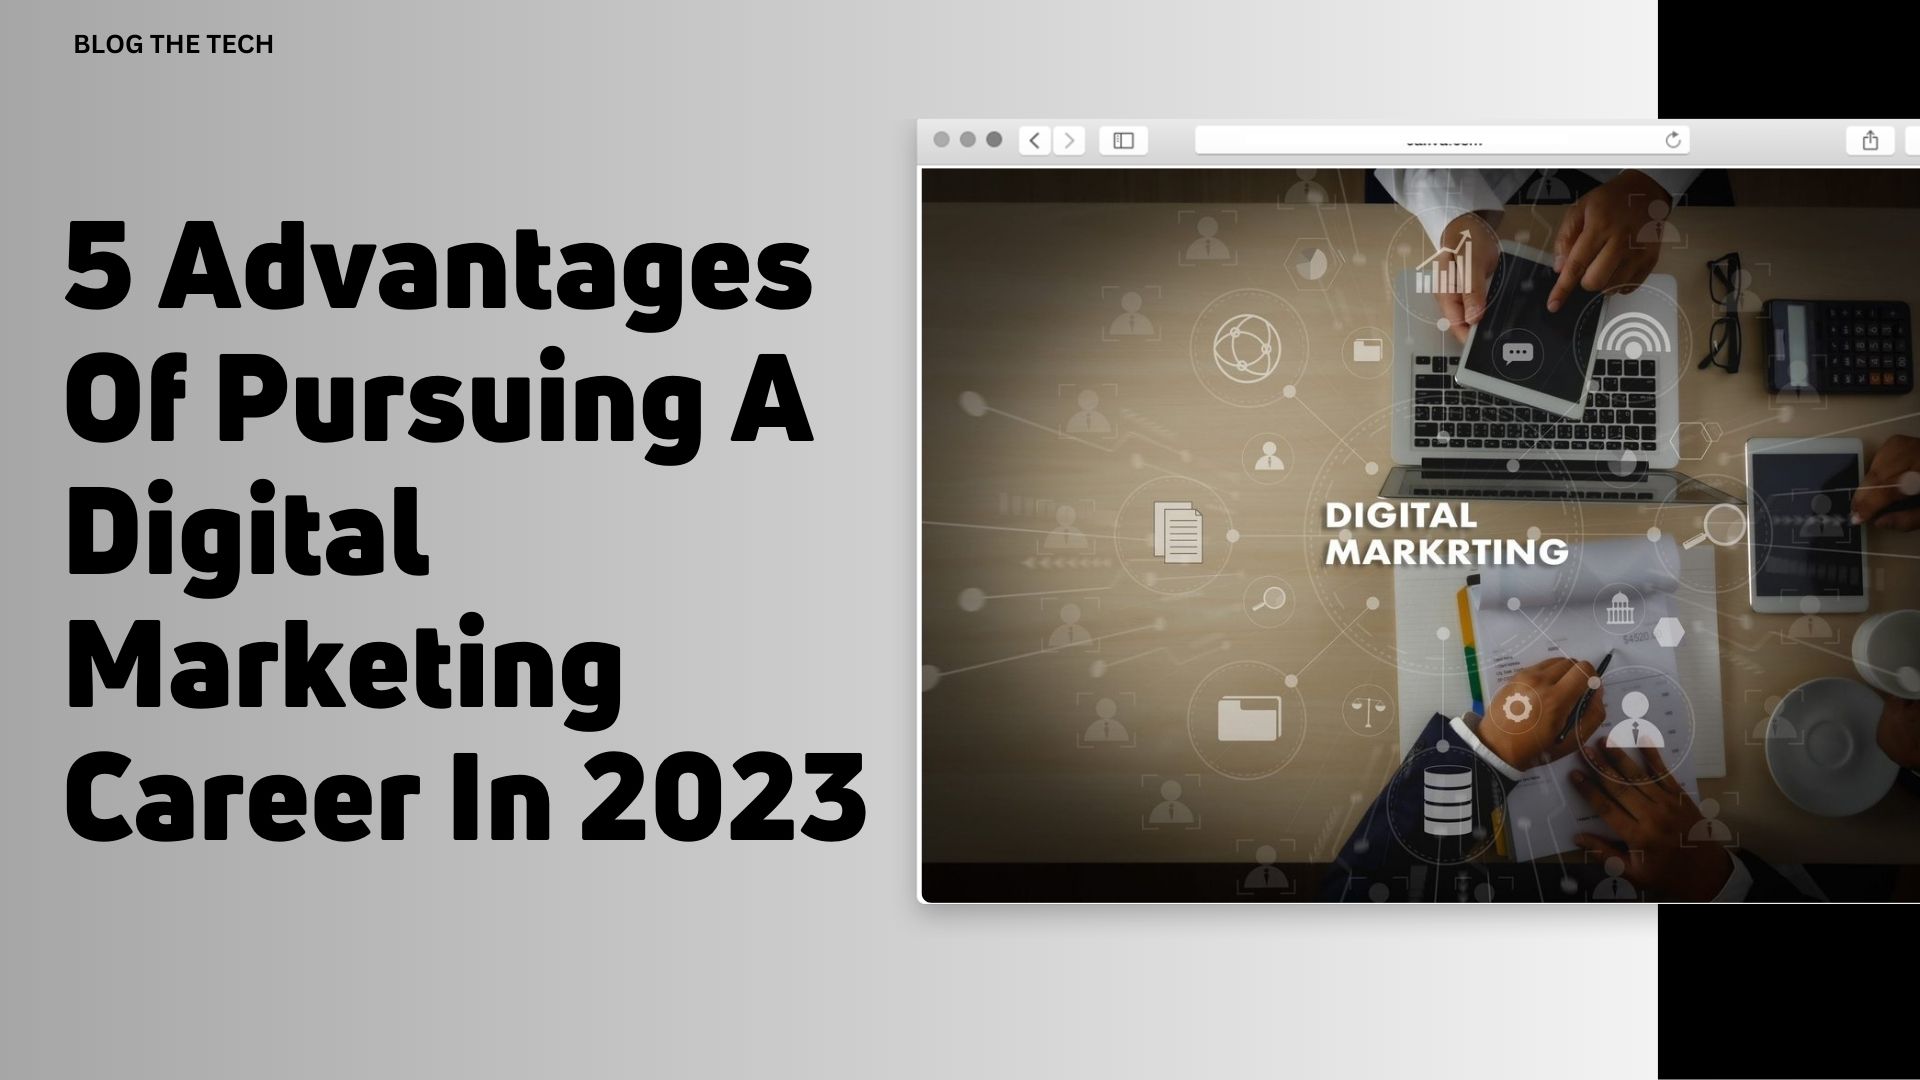 Advantages of Pursuing a Digital Marketing Career In 2023